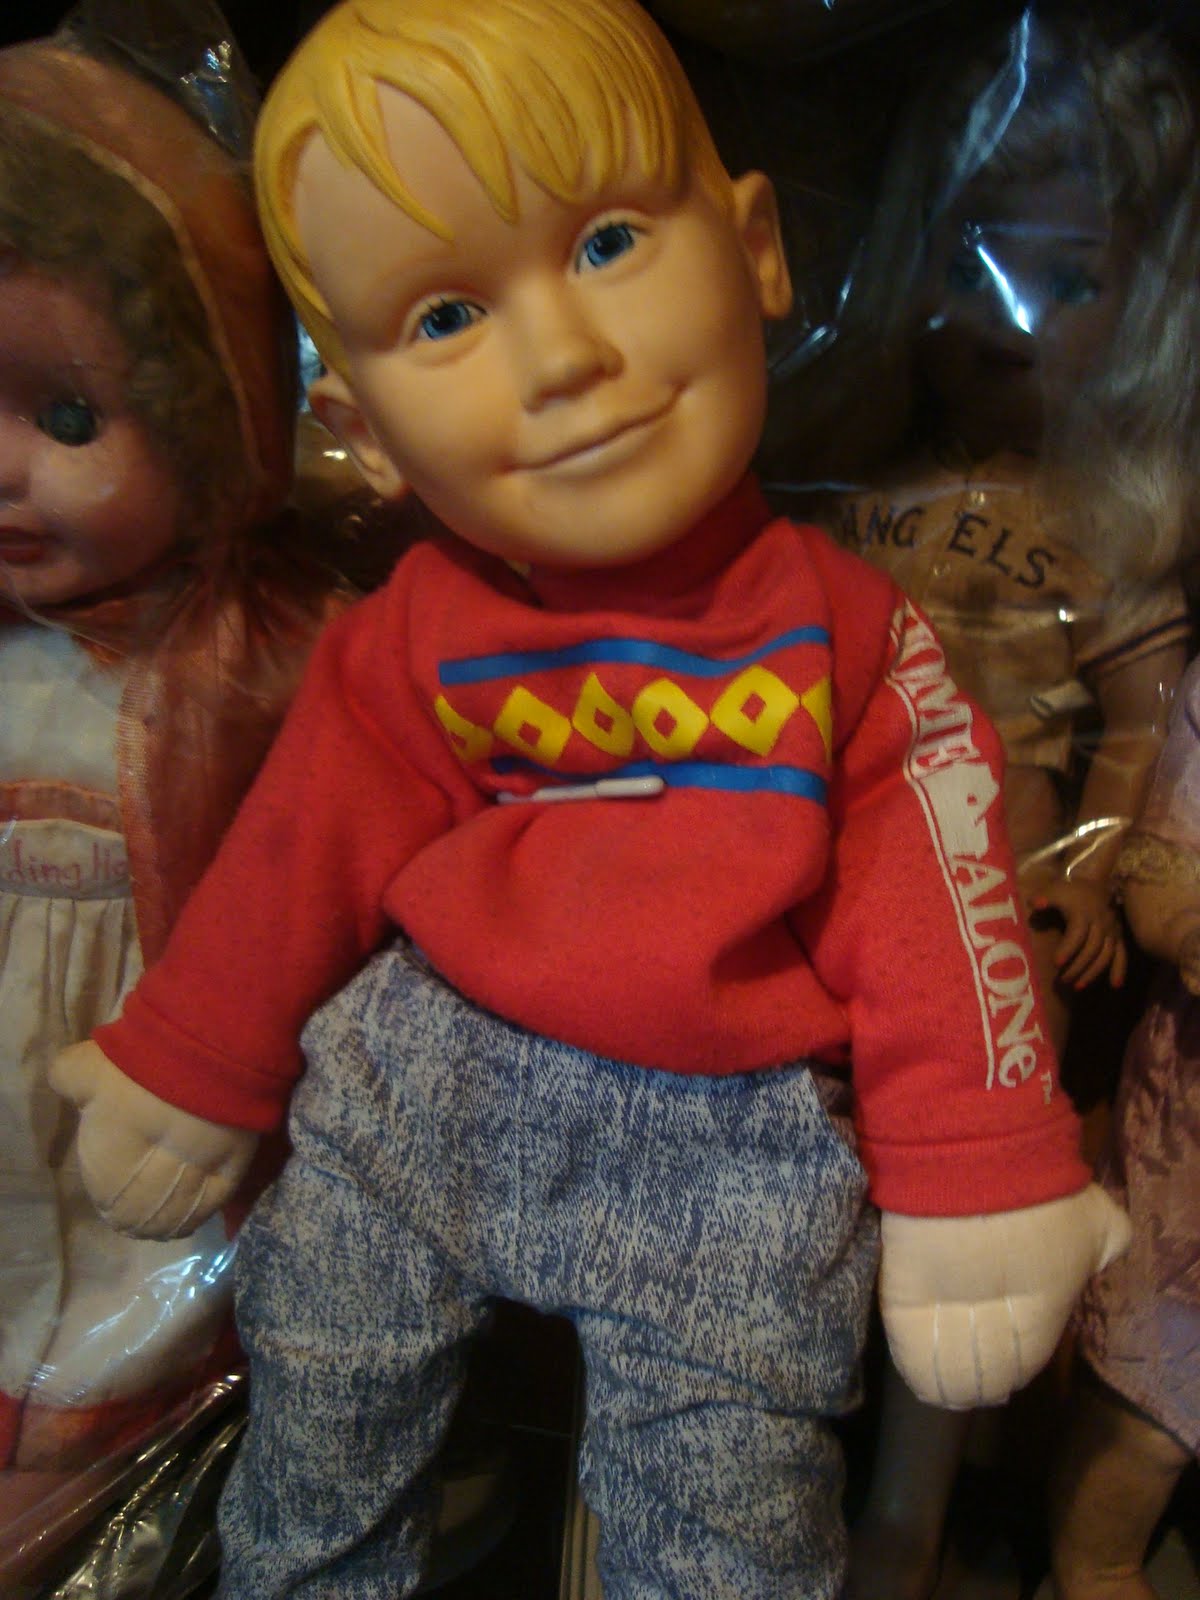 home alone doll